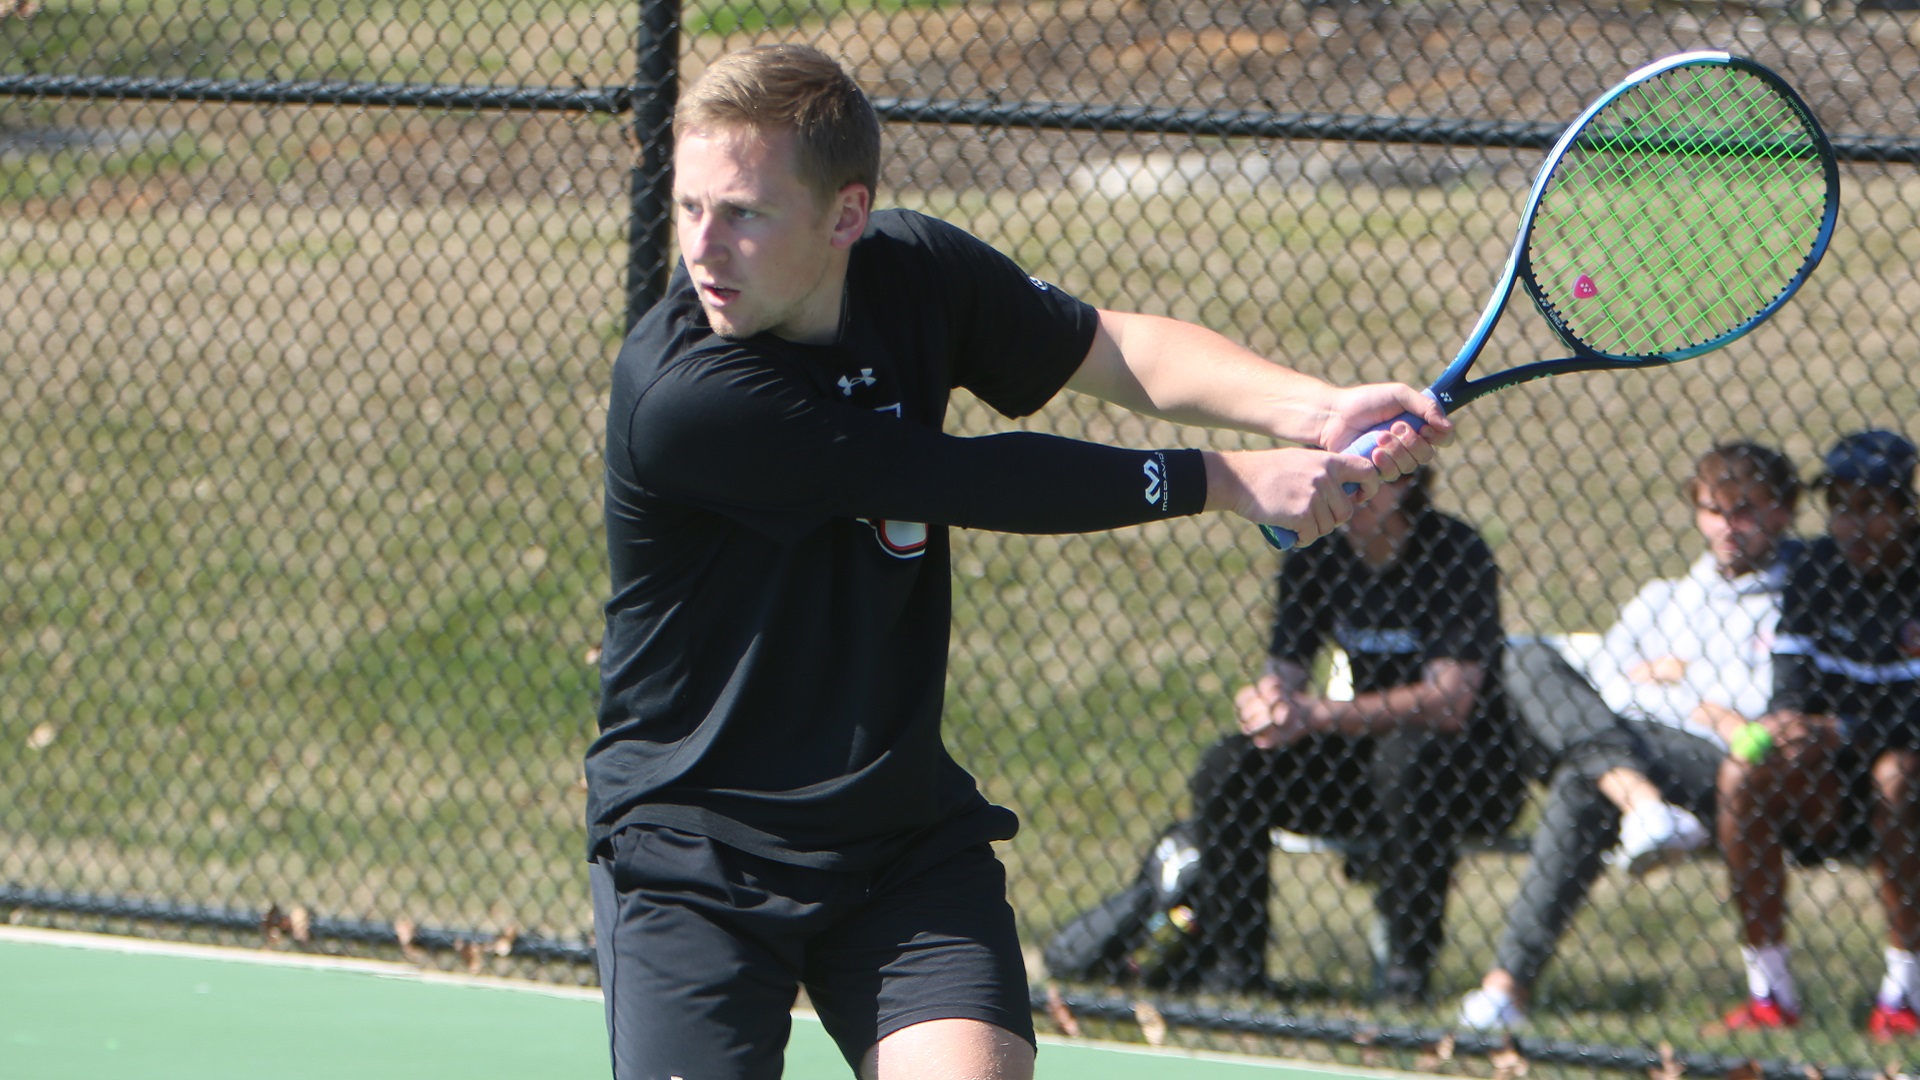 Anton Krondell was part of a winning doubles team for the Pioneers against North Georgia (photo by TU Athletic Communications)